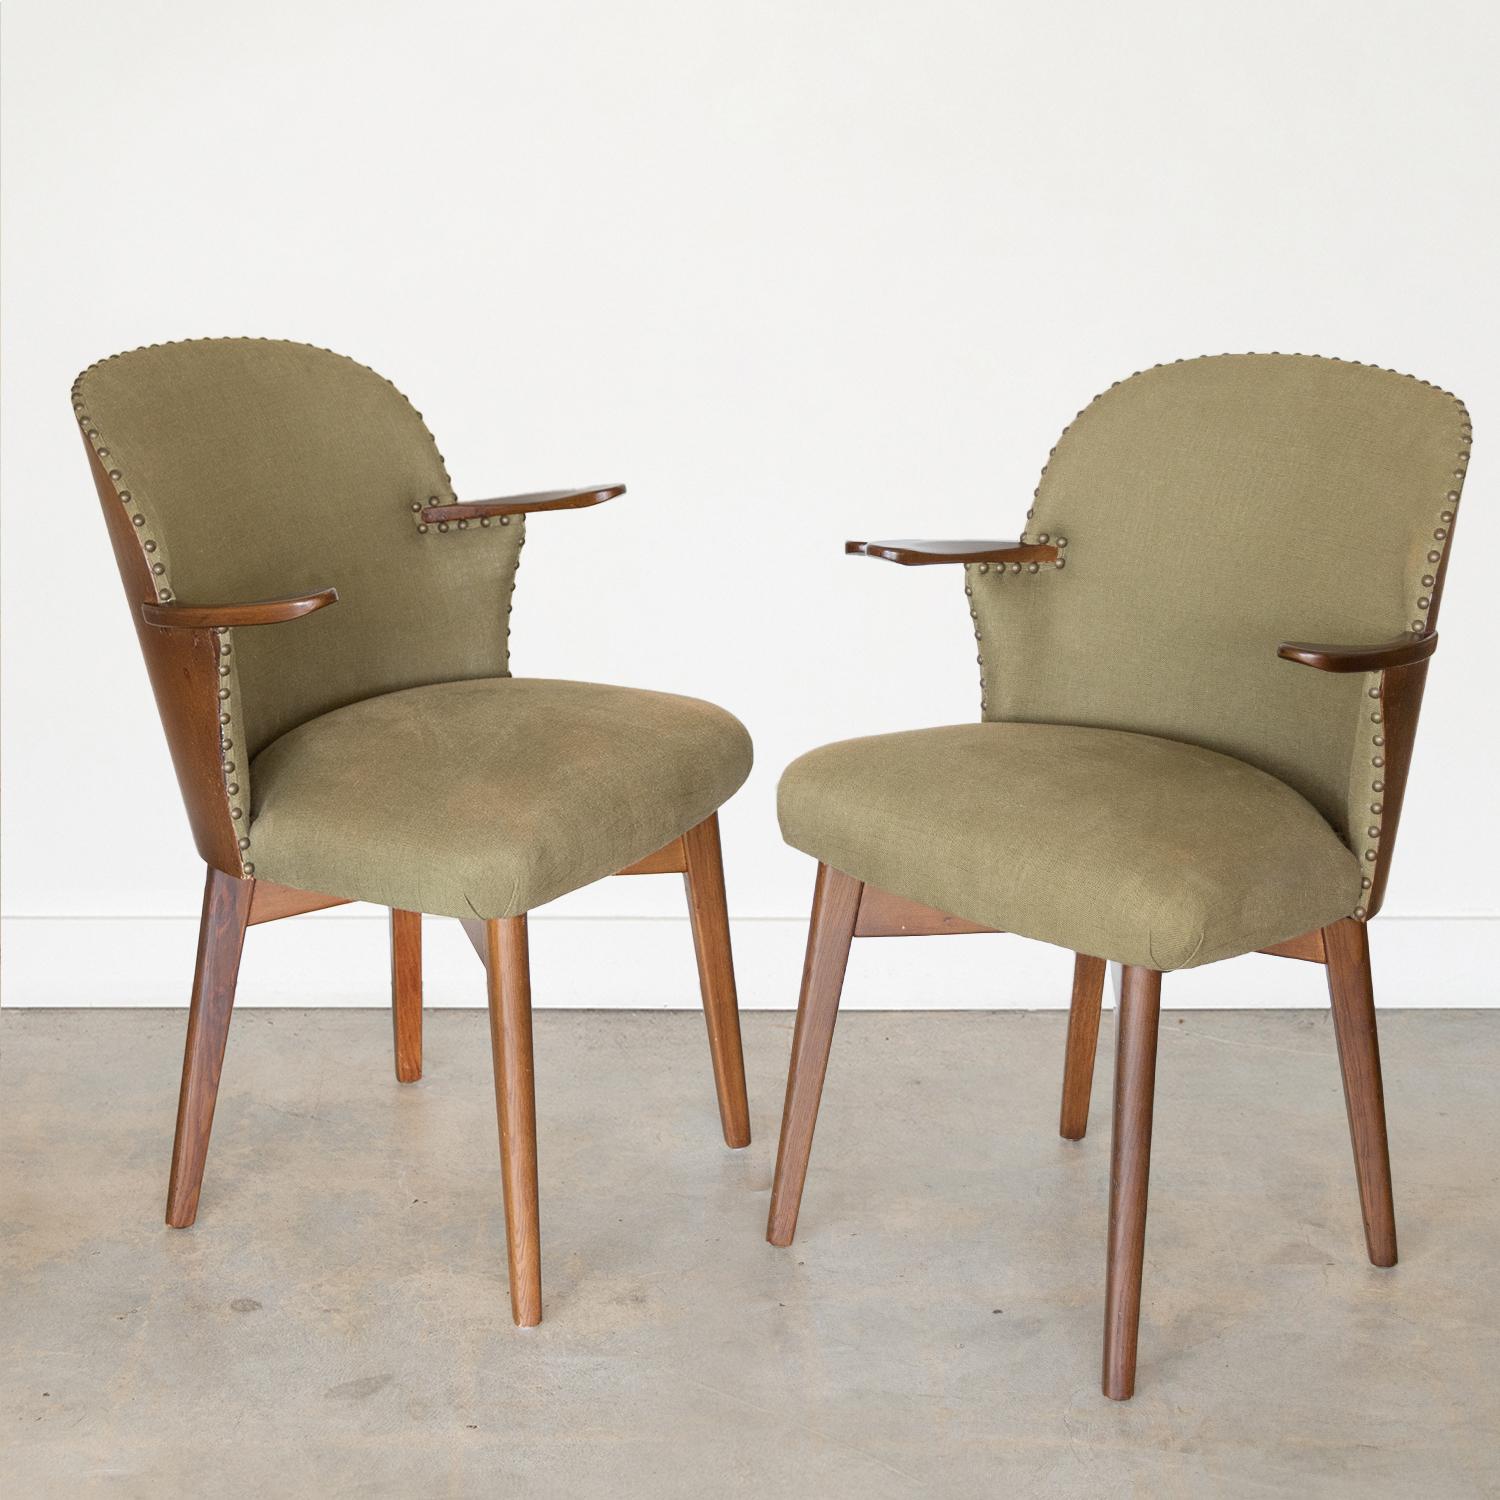 Beautiful wood back dining chairs from The Netherlands, 1960's. Curved wood veneer back with newly upholstered seat in beautiful green linen and brass tack detailing. Carved wood arms and four wood tapered legs, all newly refinished. Incredible